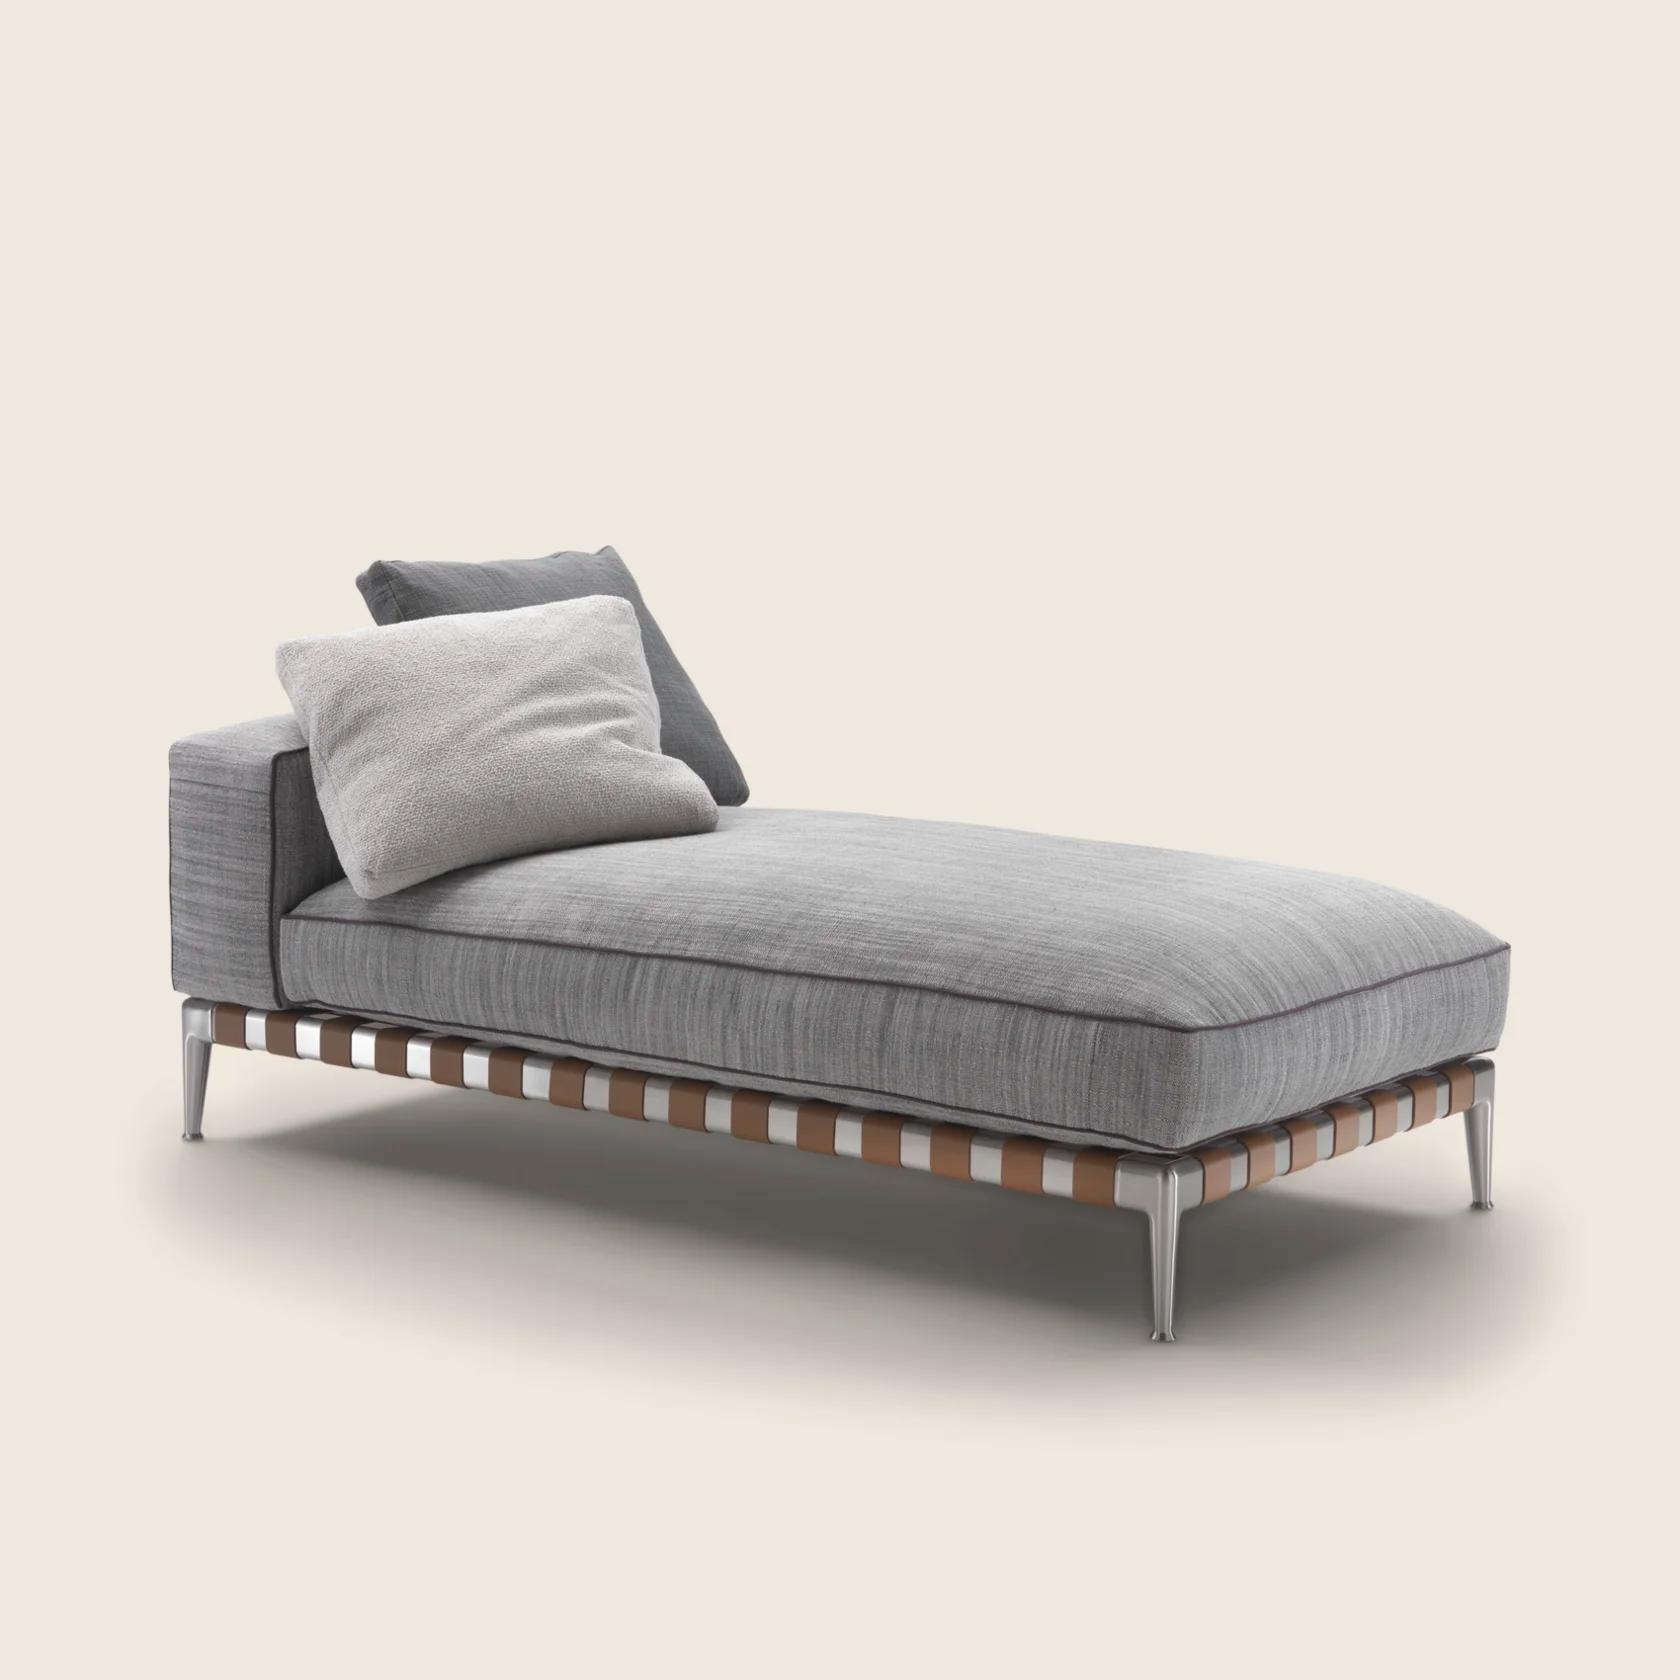 GREGORY | GREGORY XL Chaiselongues/Dormeuse | Design Made in Italy -  Flexform